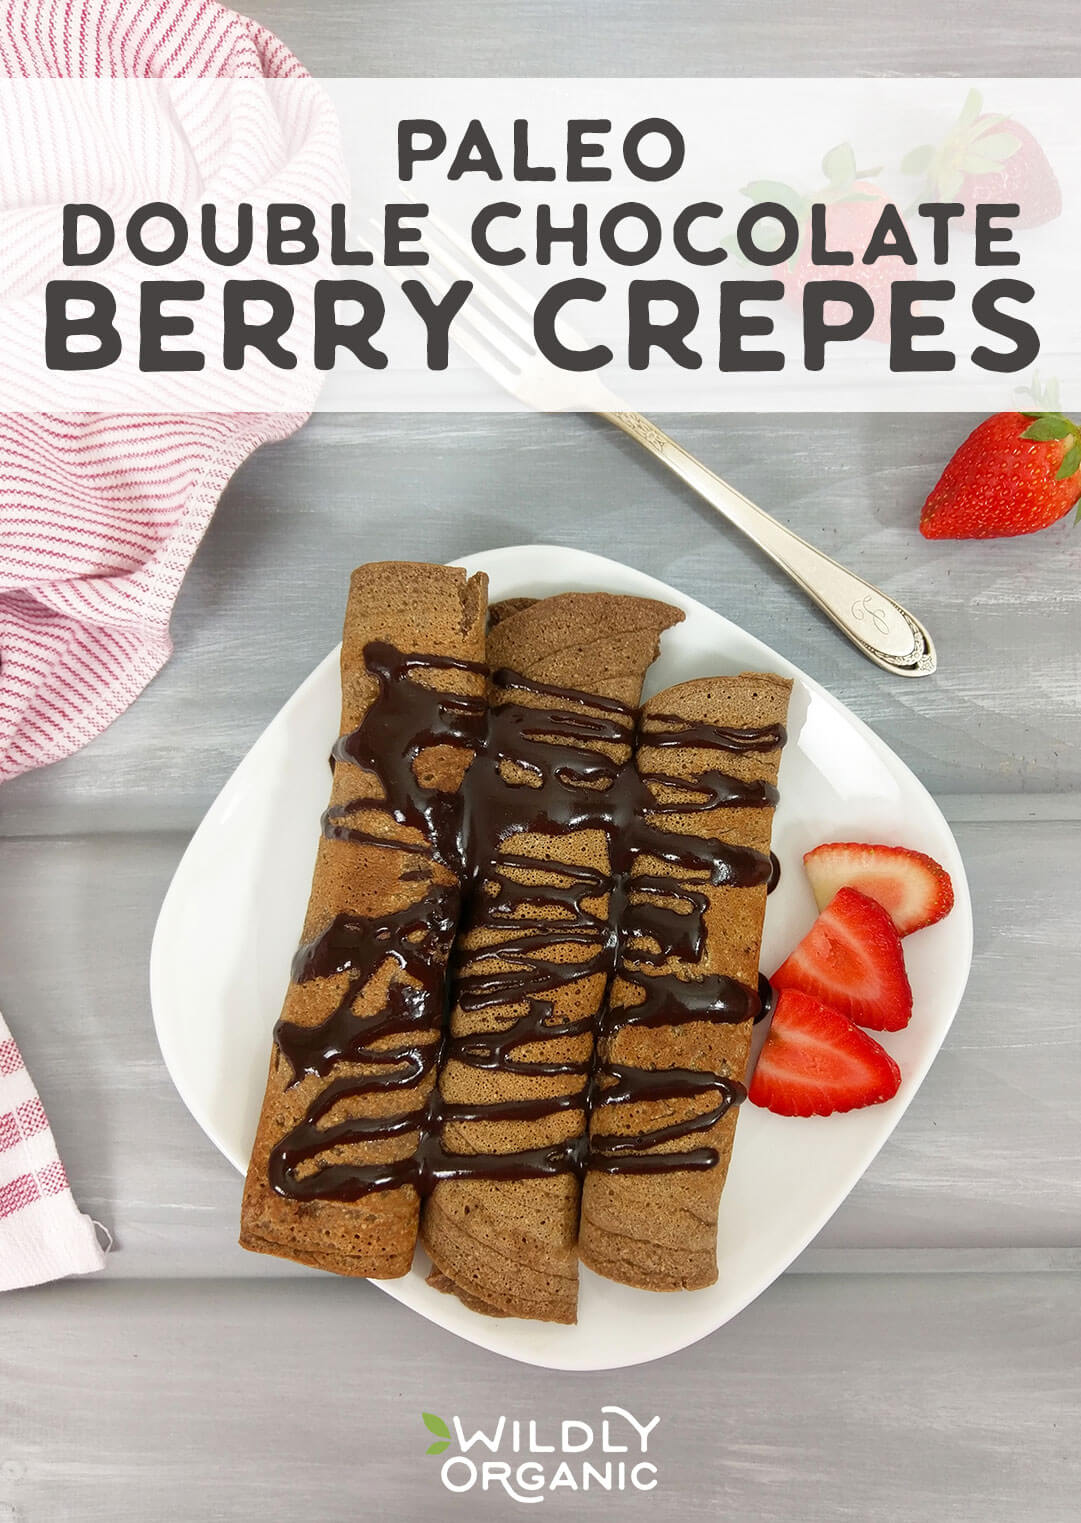 Photo of a plate of paleo double chocolate crepes from above with strawberries on the side.